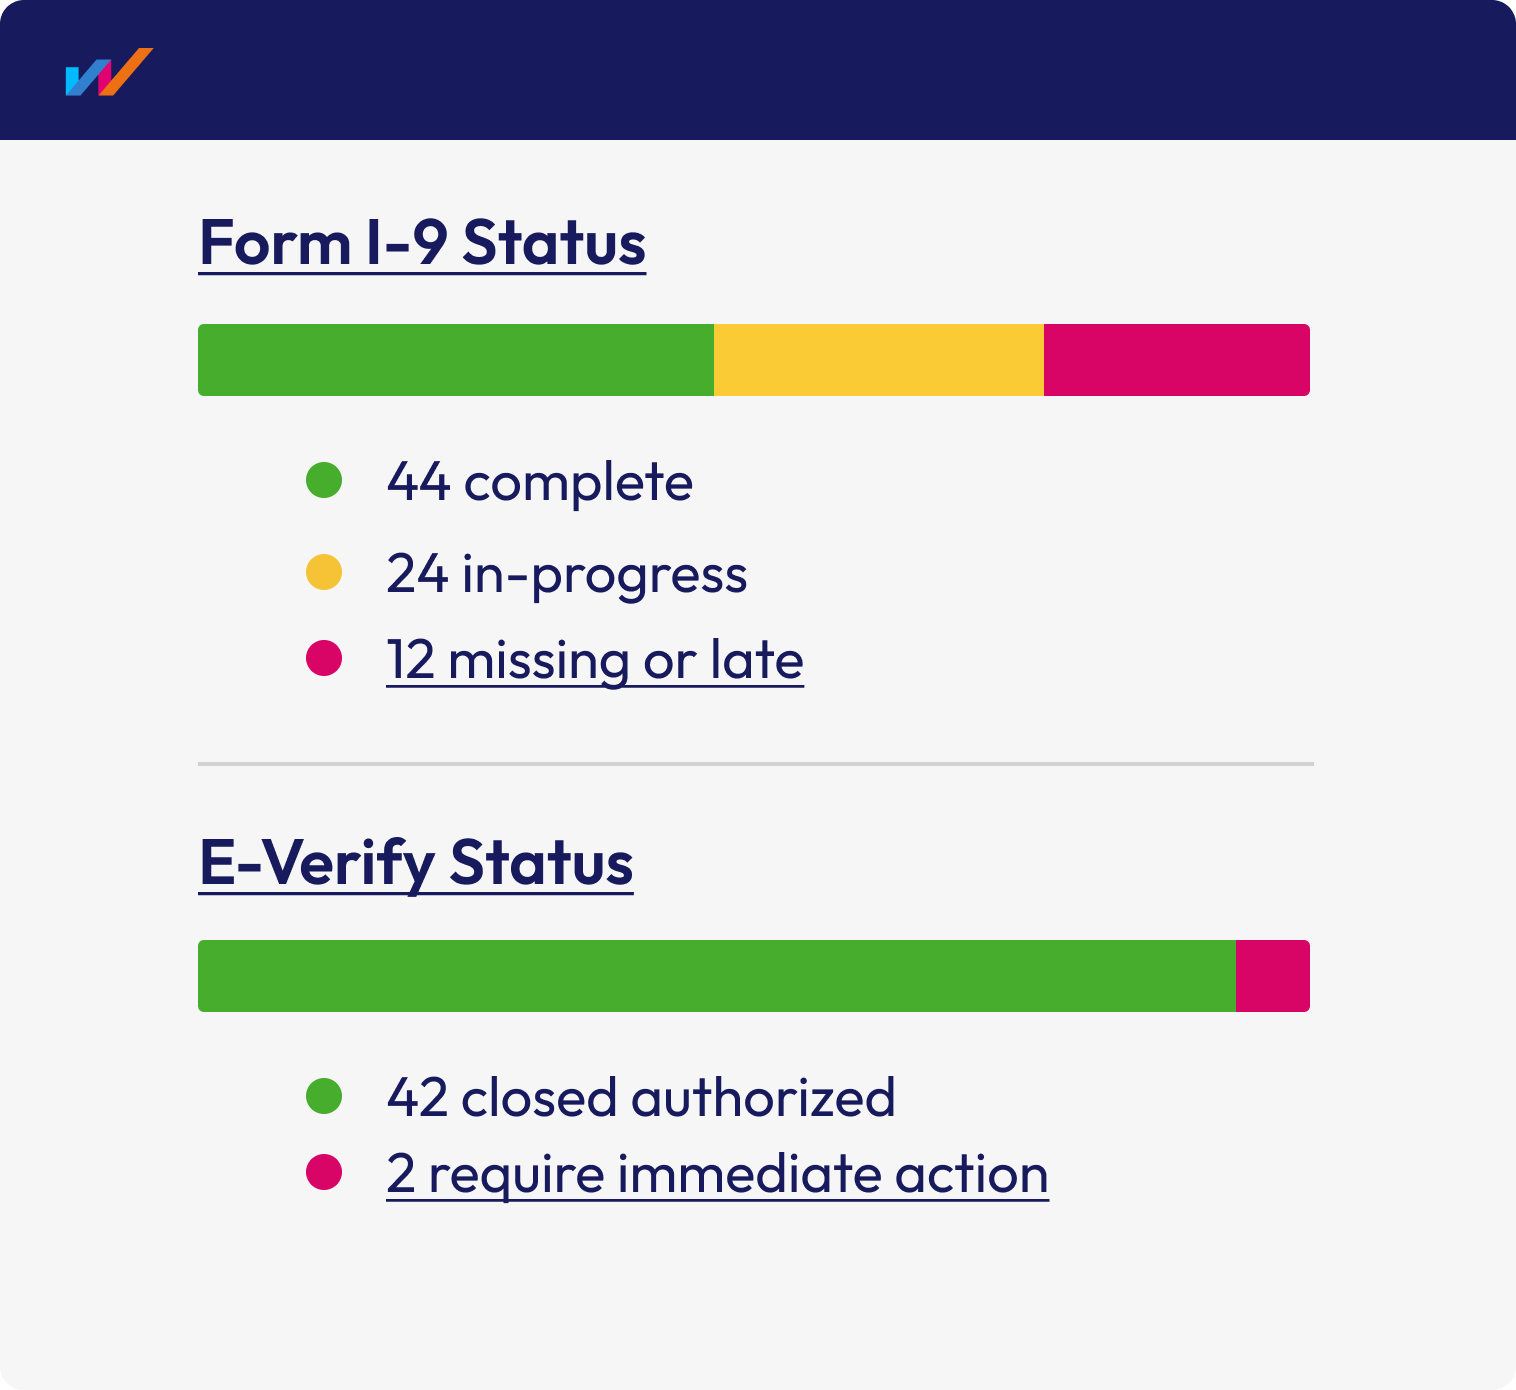 WorkBright admin dashboard displaying what a client will see in connection with tracking the lifecycle of their onboarding and Form I-9 statuses for their workers.